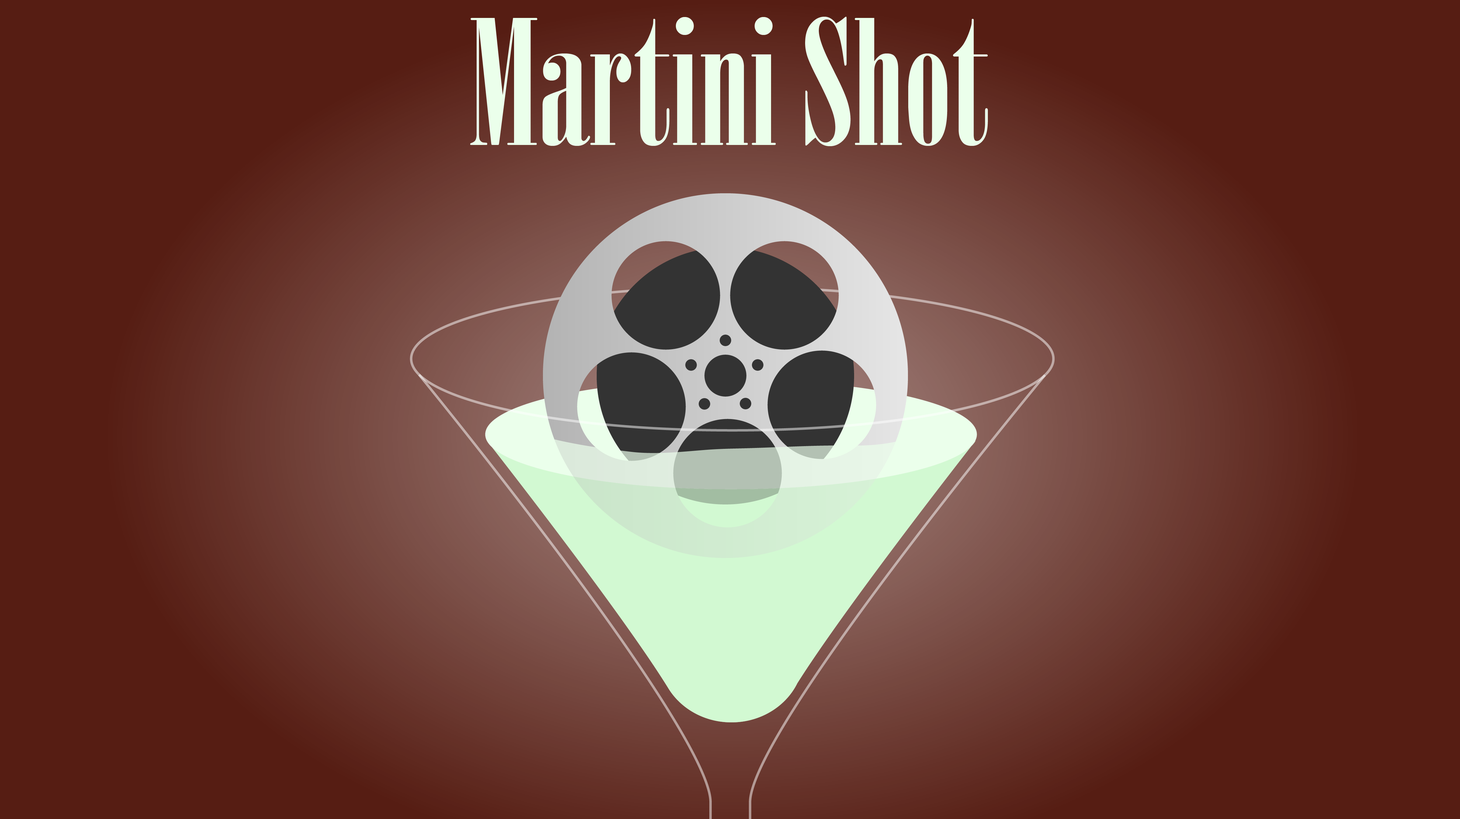 This is Rob Long and on today’s Martini Shot I download the DirecTV Now app to watch the HBO Go app and Showtime Anytime app, but what I needed to do was download the regular DirecTV app to watch the HBO Now app. I think.